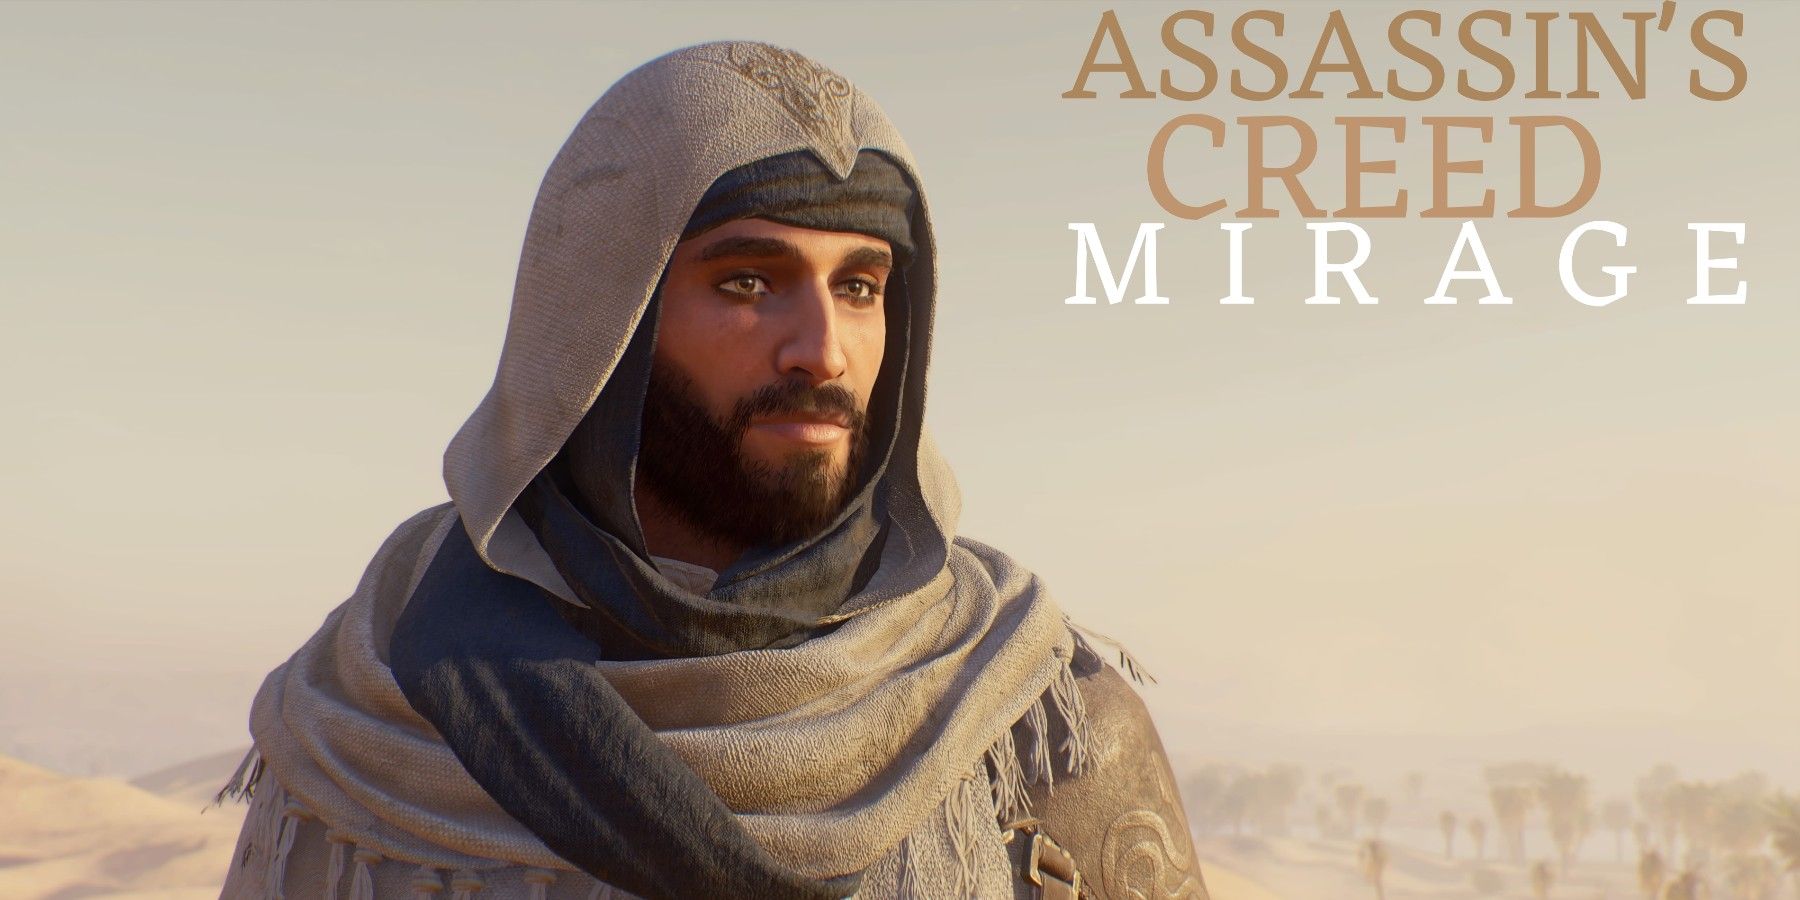 Is Assassin's Creed: Mirage on Game Pass?